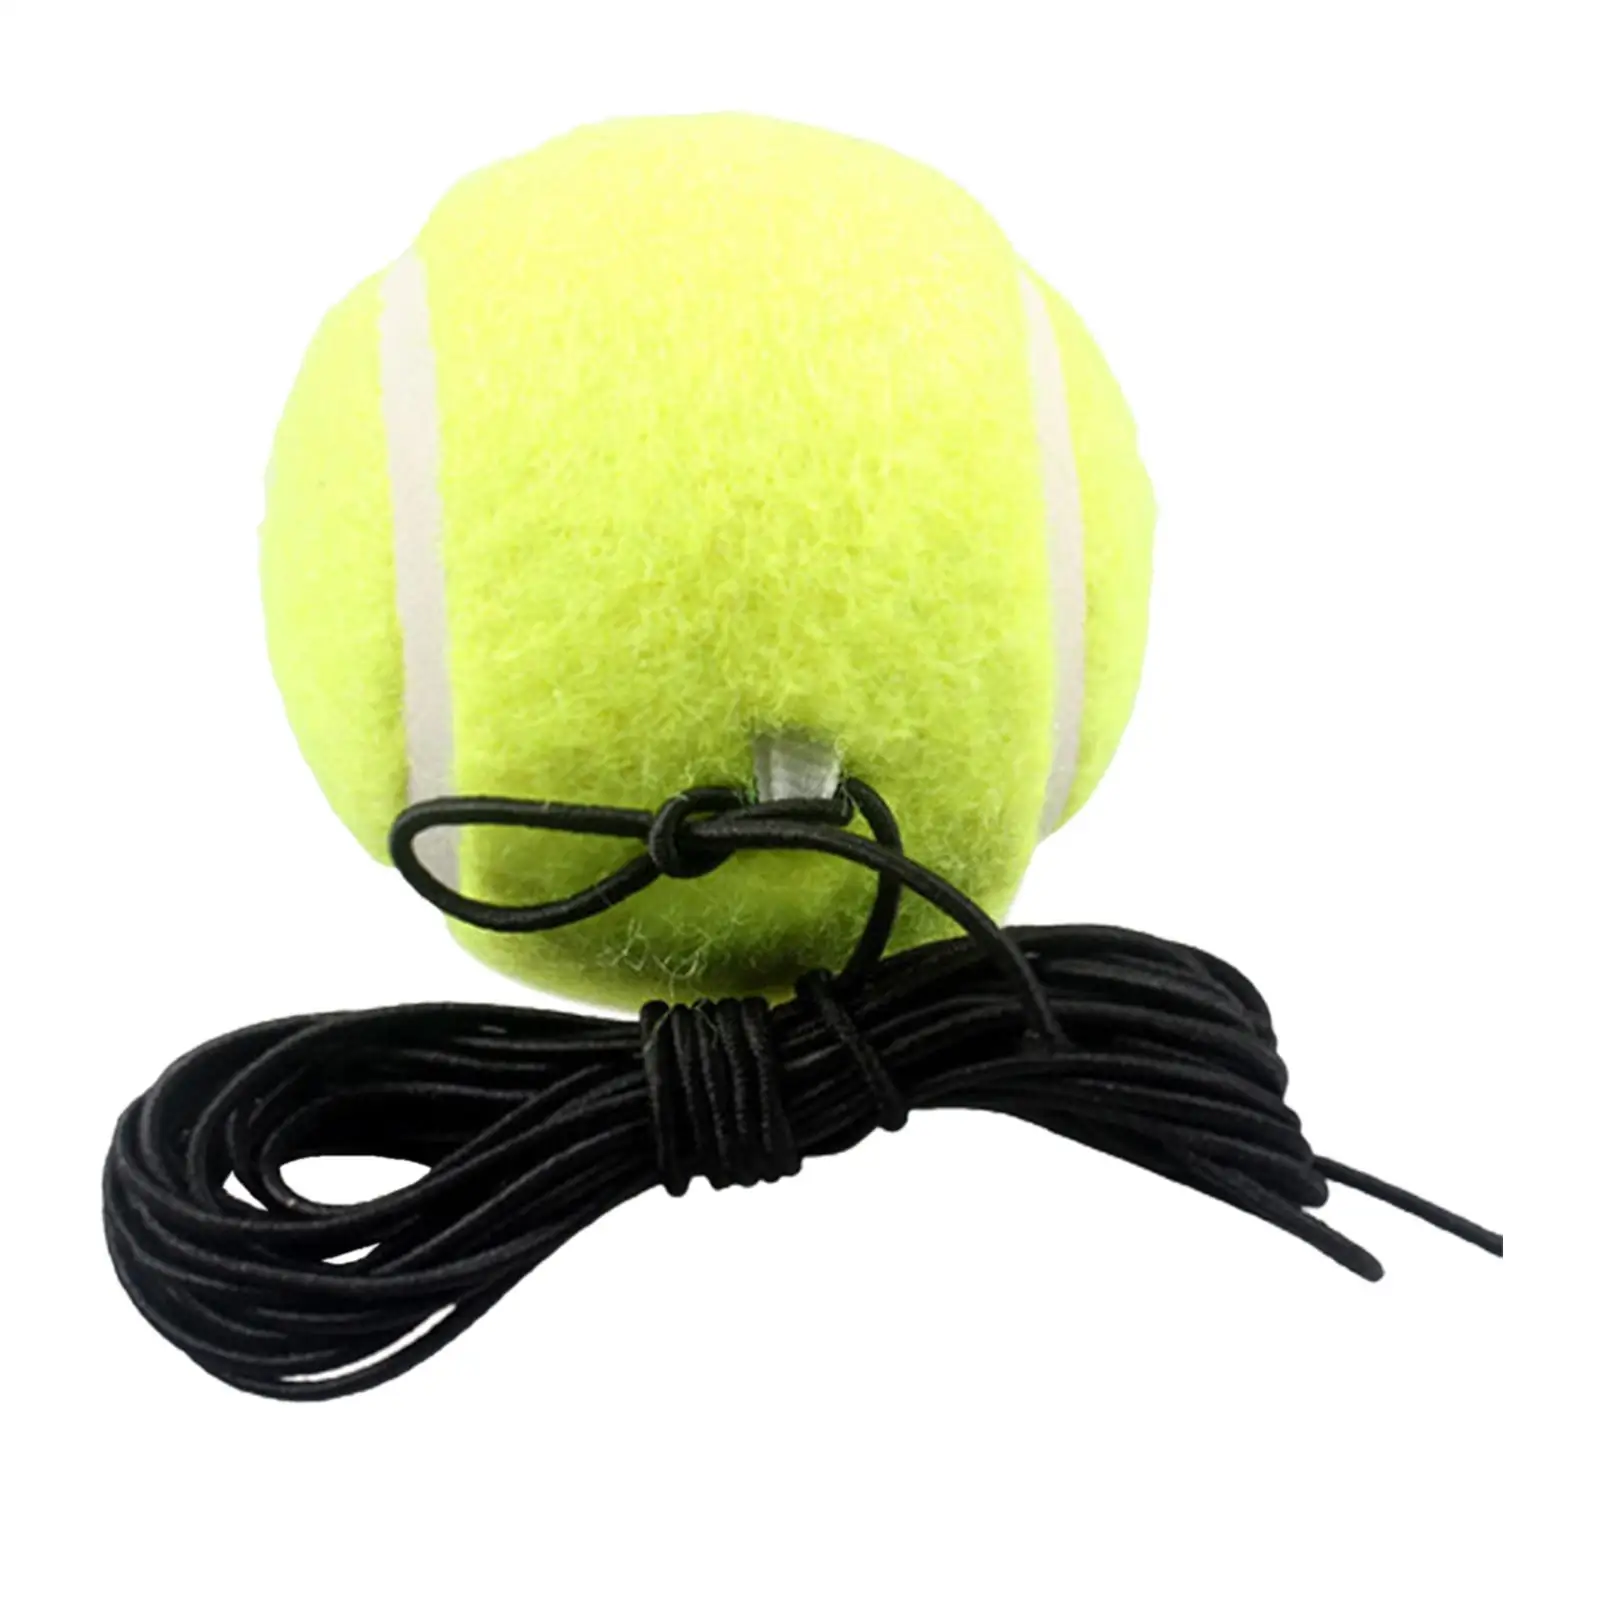 Tennis Trainer Ball with String Singles Balls Accessories Teaching Aid Tennis Ball Rebounder String for Kids Replacement